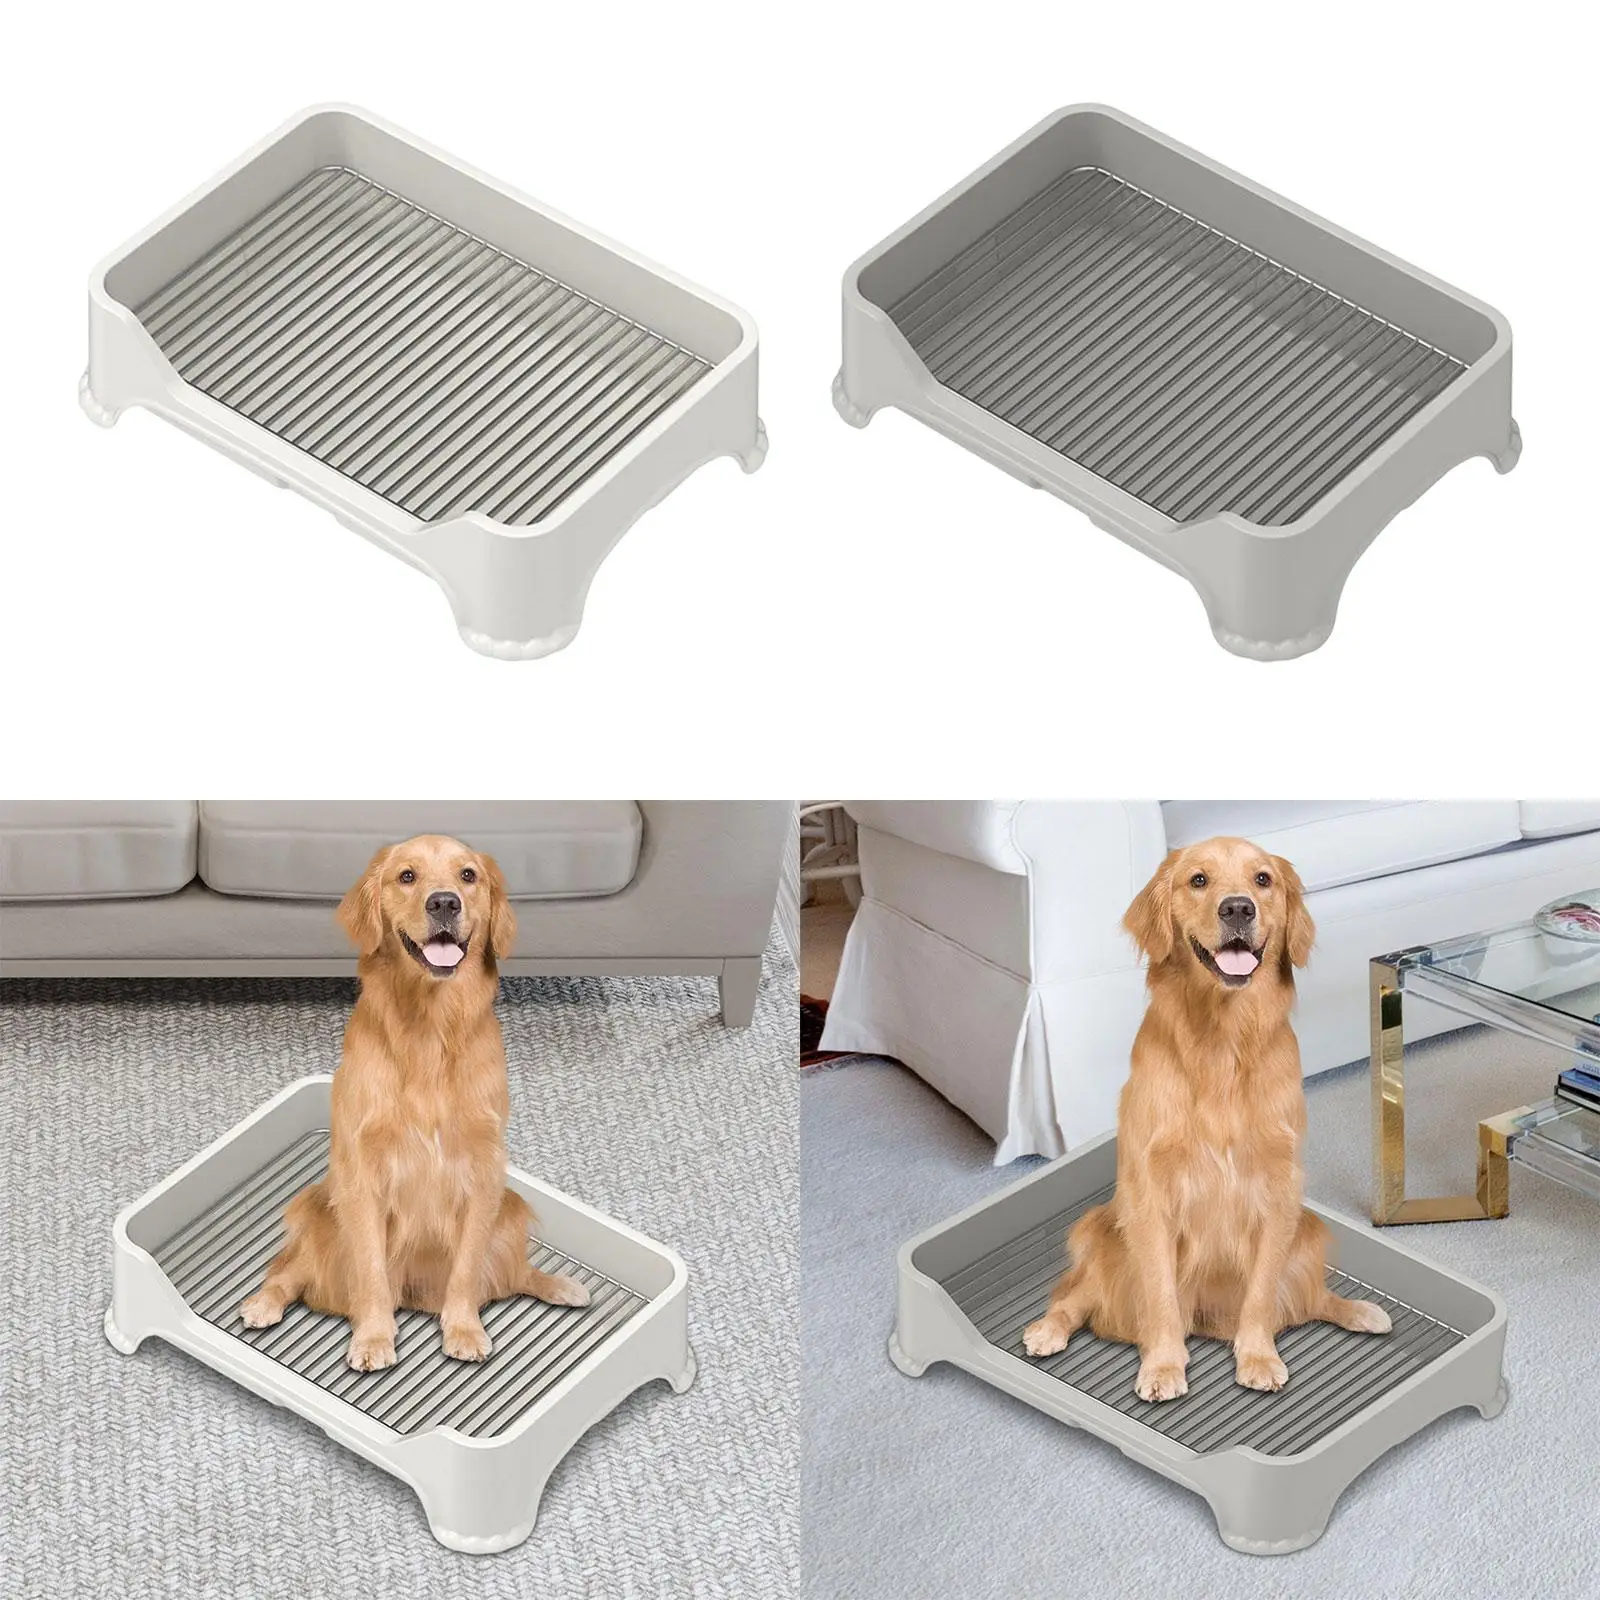 Dog Toilet Pet Litter Pan Training Pad Holder Outdoor Removable Dog Potty Tray Puppy Potty Tray Puppy Litter Box Pet Accessories